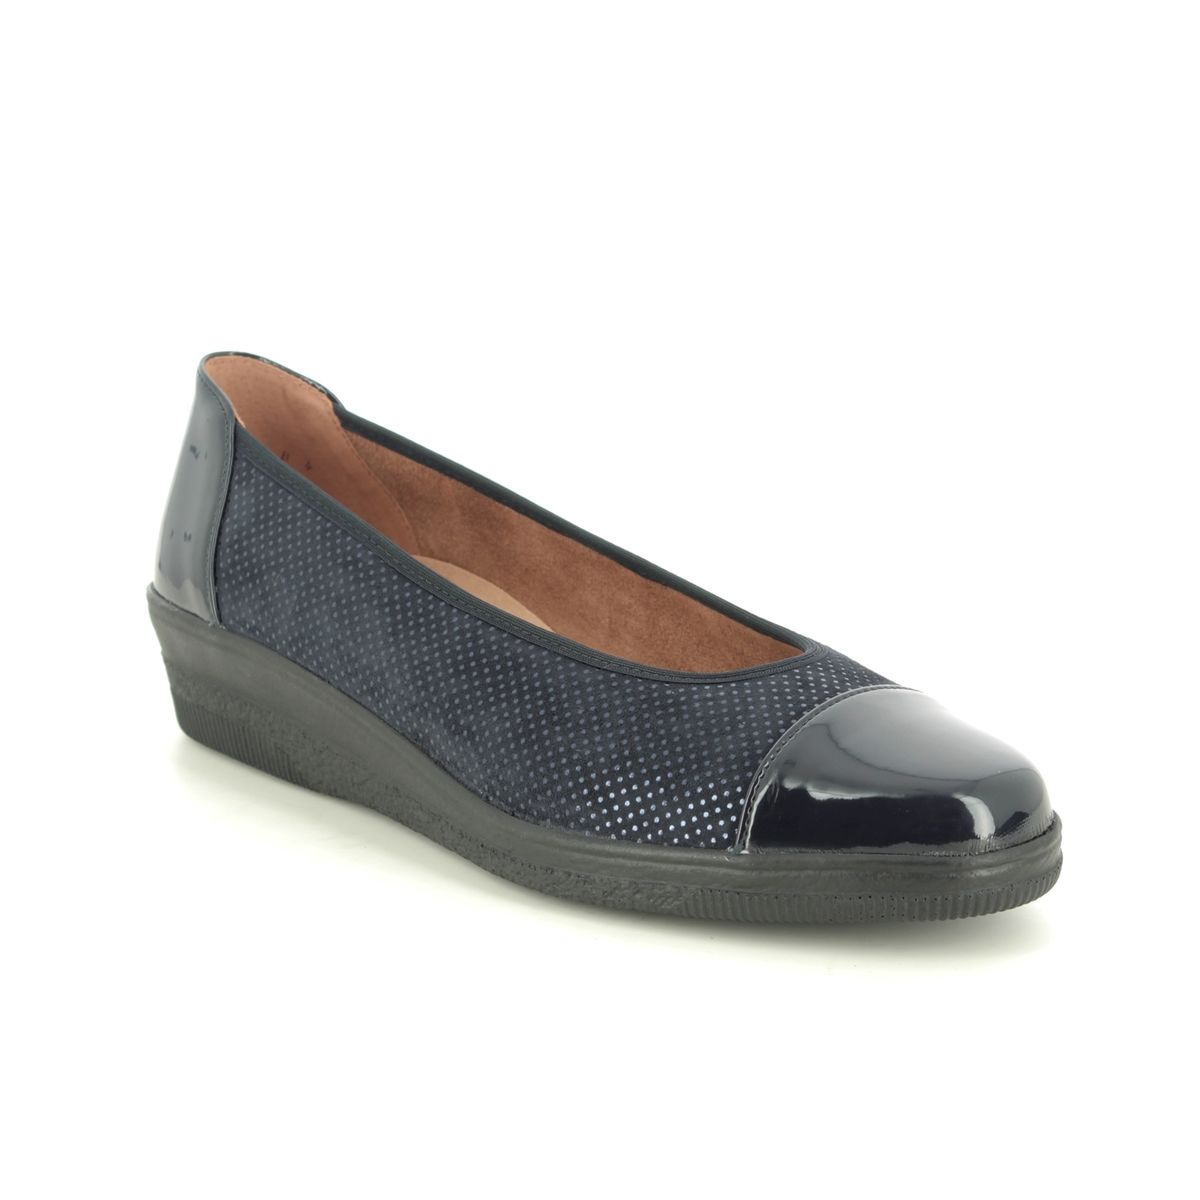 Gabor Petunia Navy patent Womens Comfort Slip On Shoes 06.402.86 in a Plain Leather and Man-made in Size 5.5